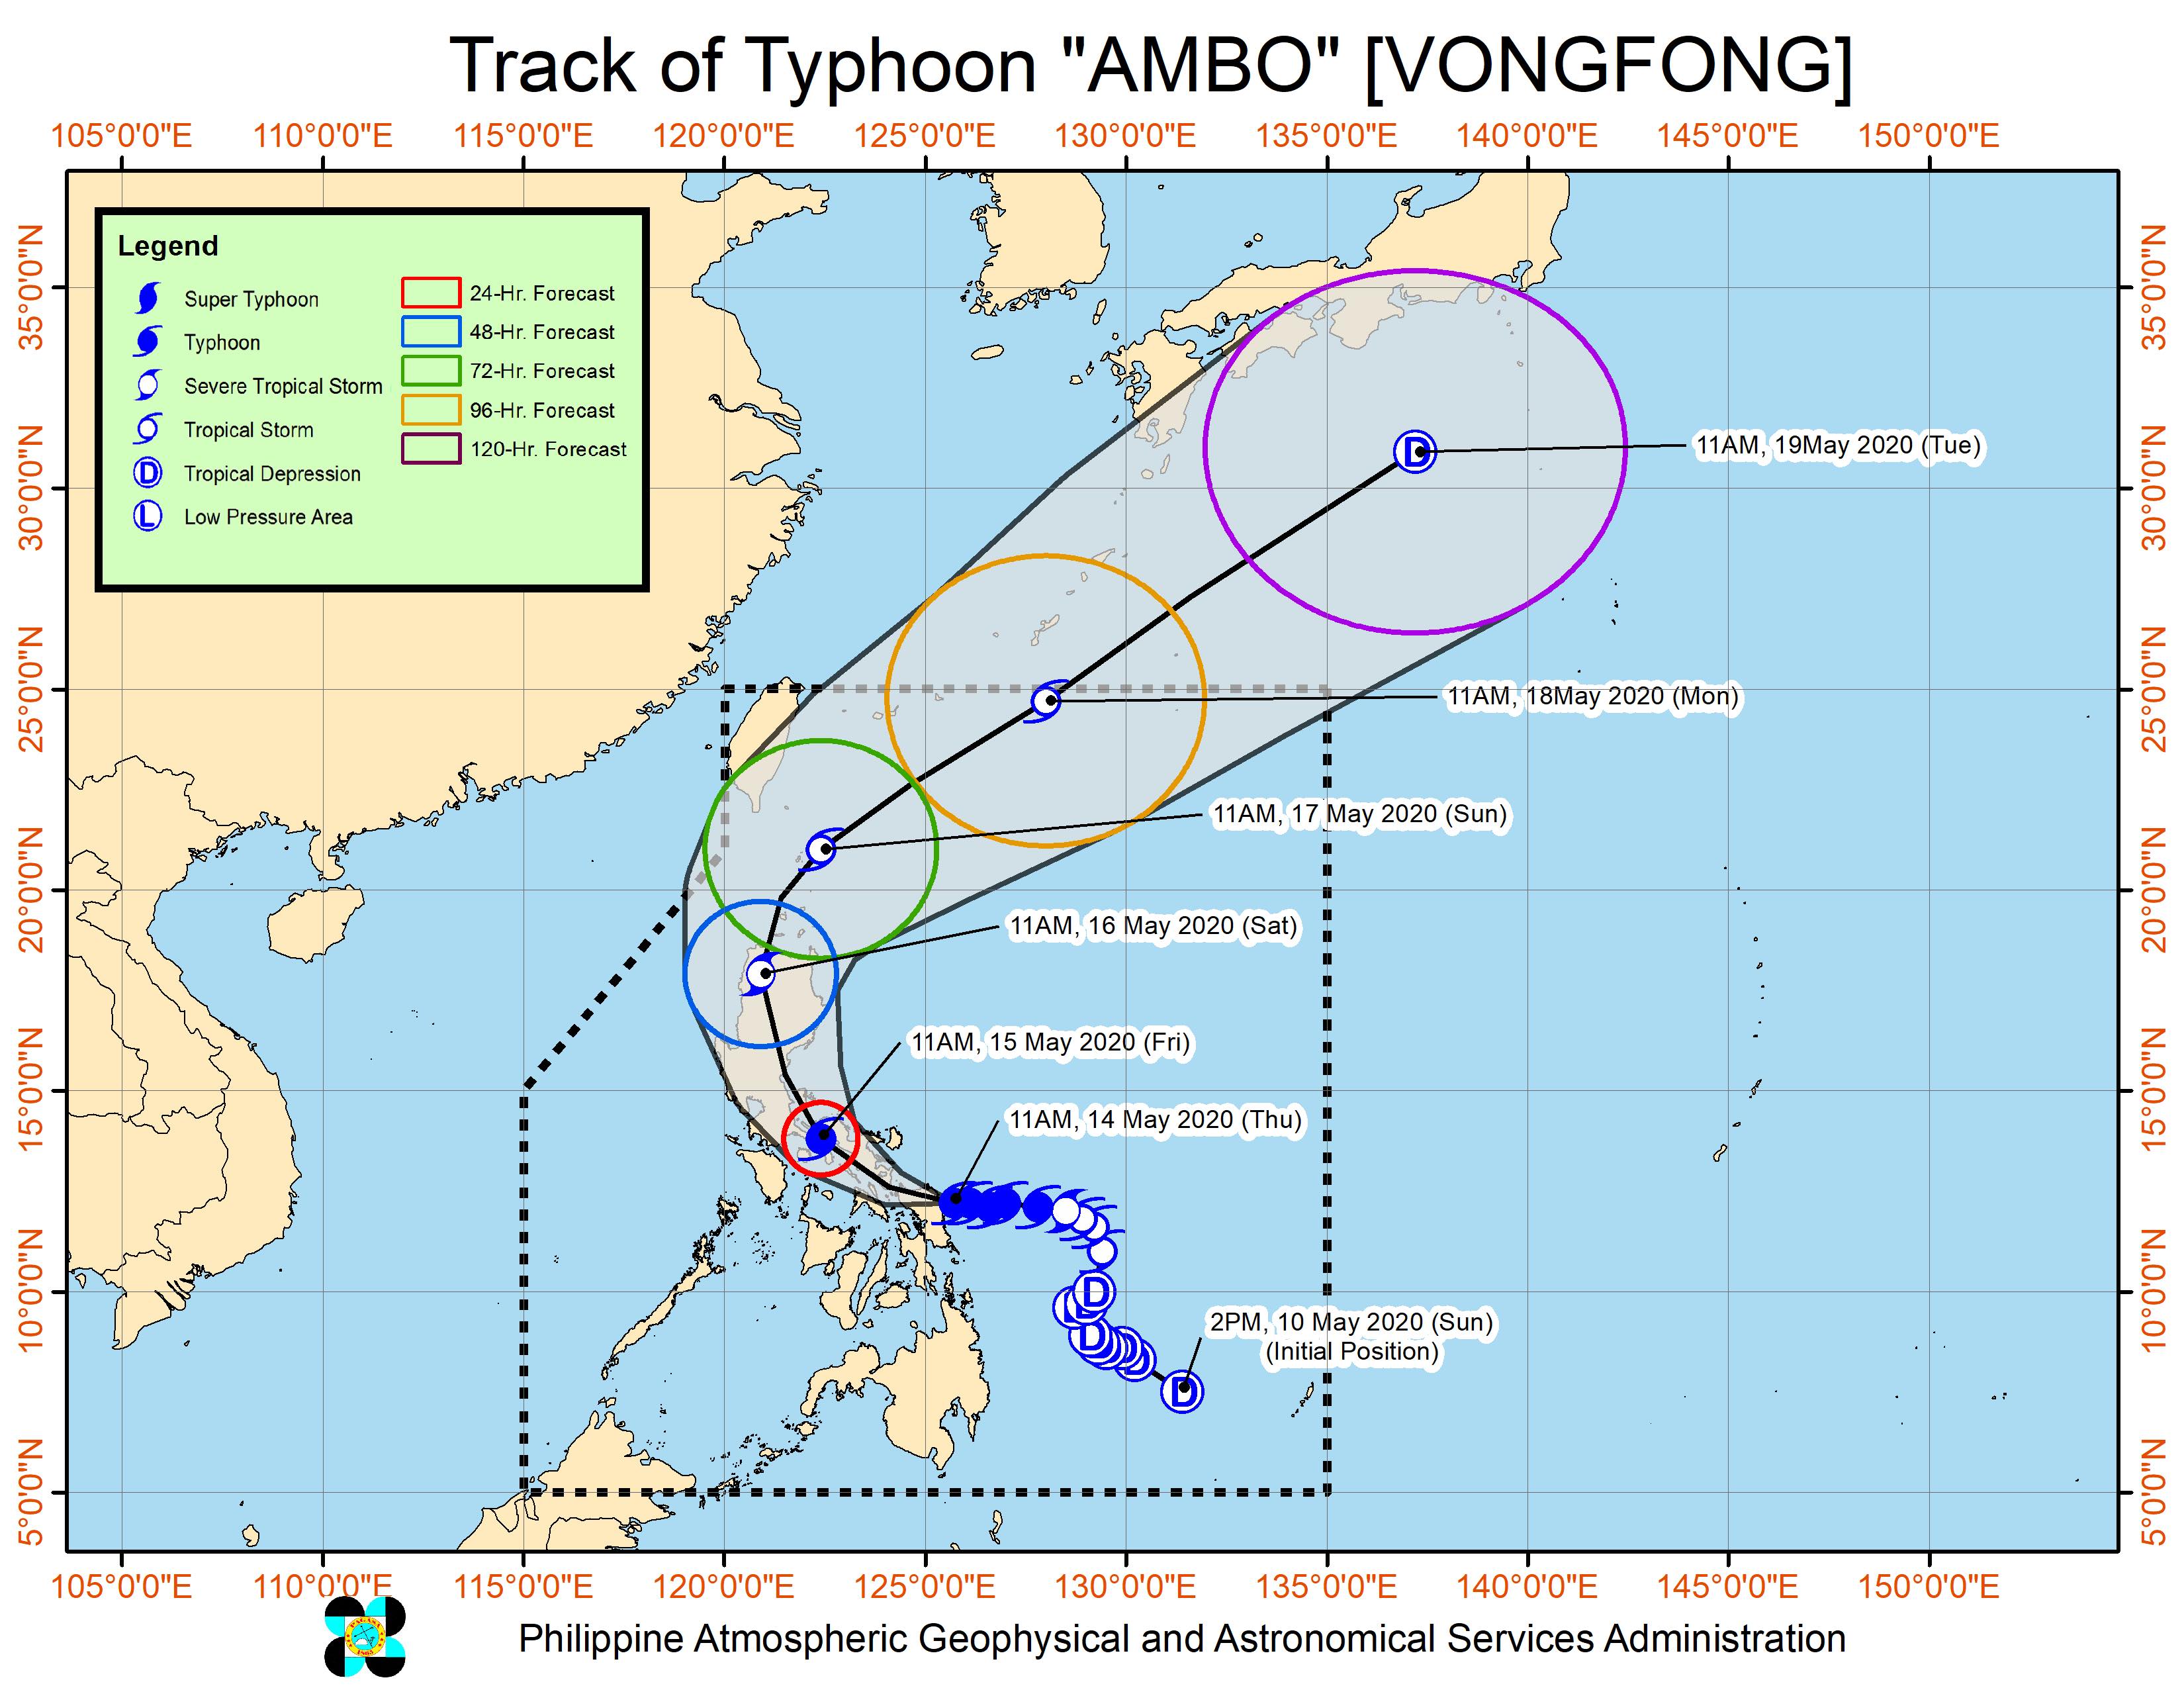 Forecast track of Typhoon Ambo (Vongfong) as of May 14, 2020, 2 pm. Image from PAGASA 